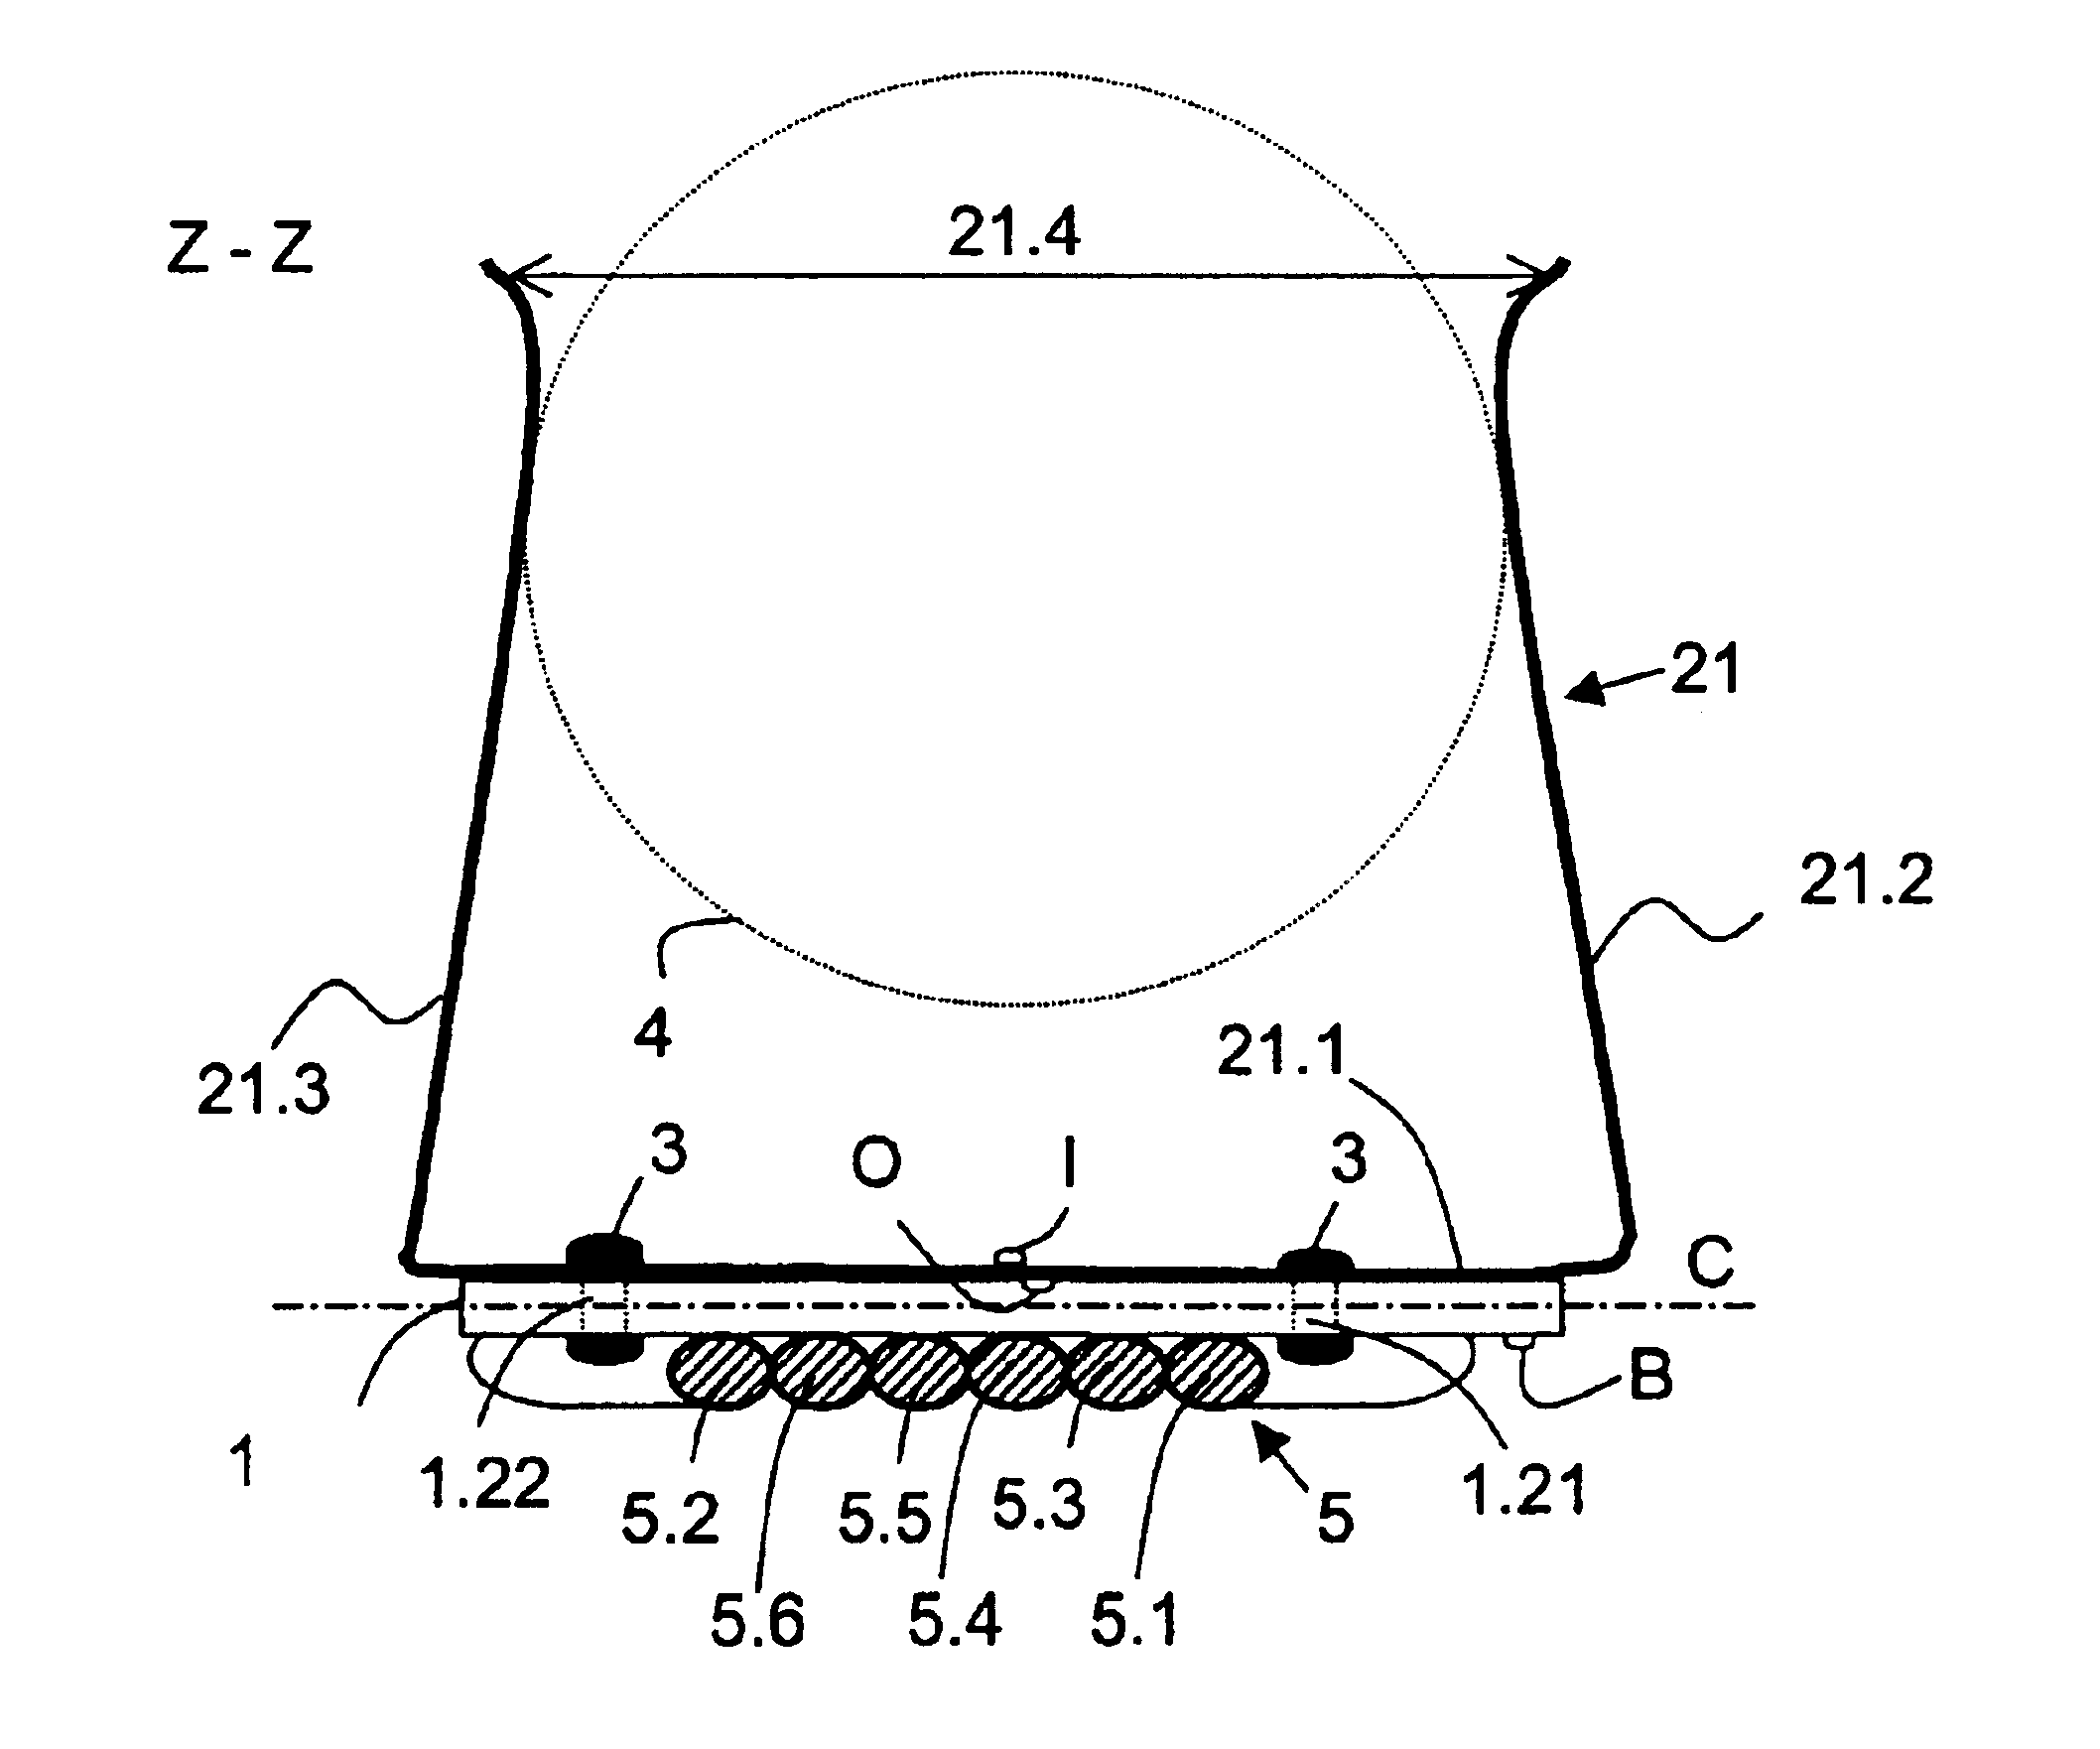 Method for producing slip ring brushes and slip ring brushes made thereby